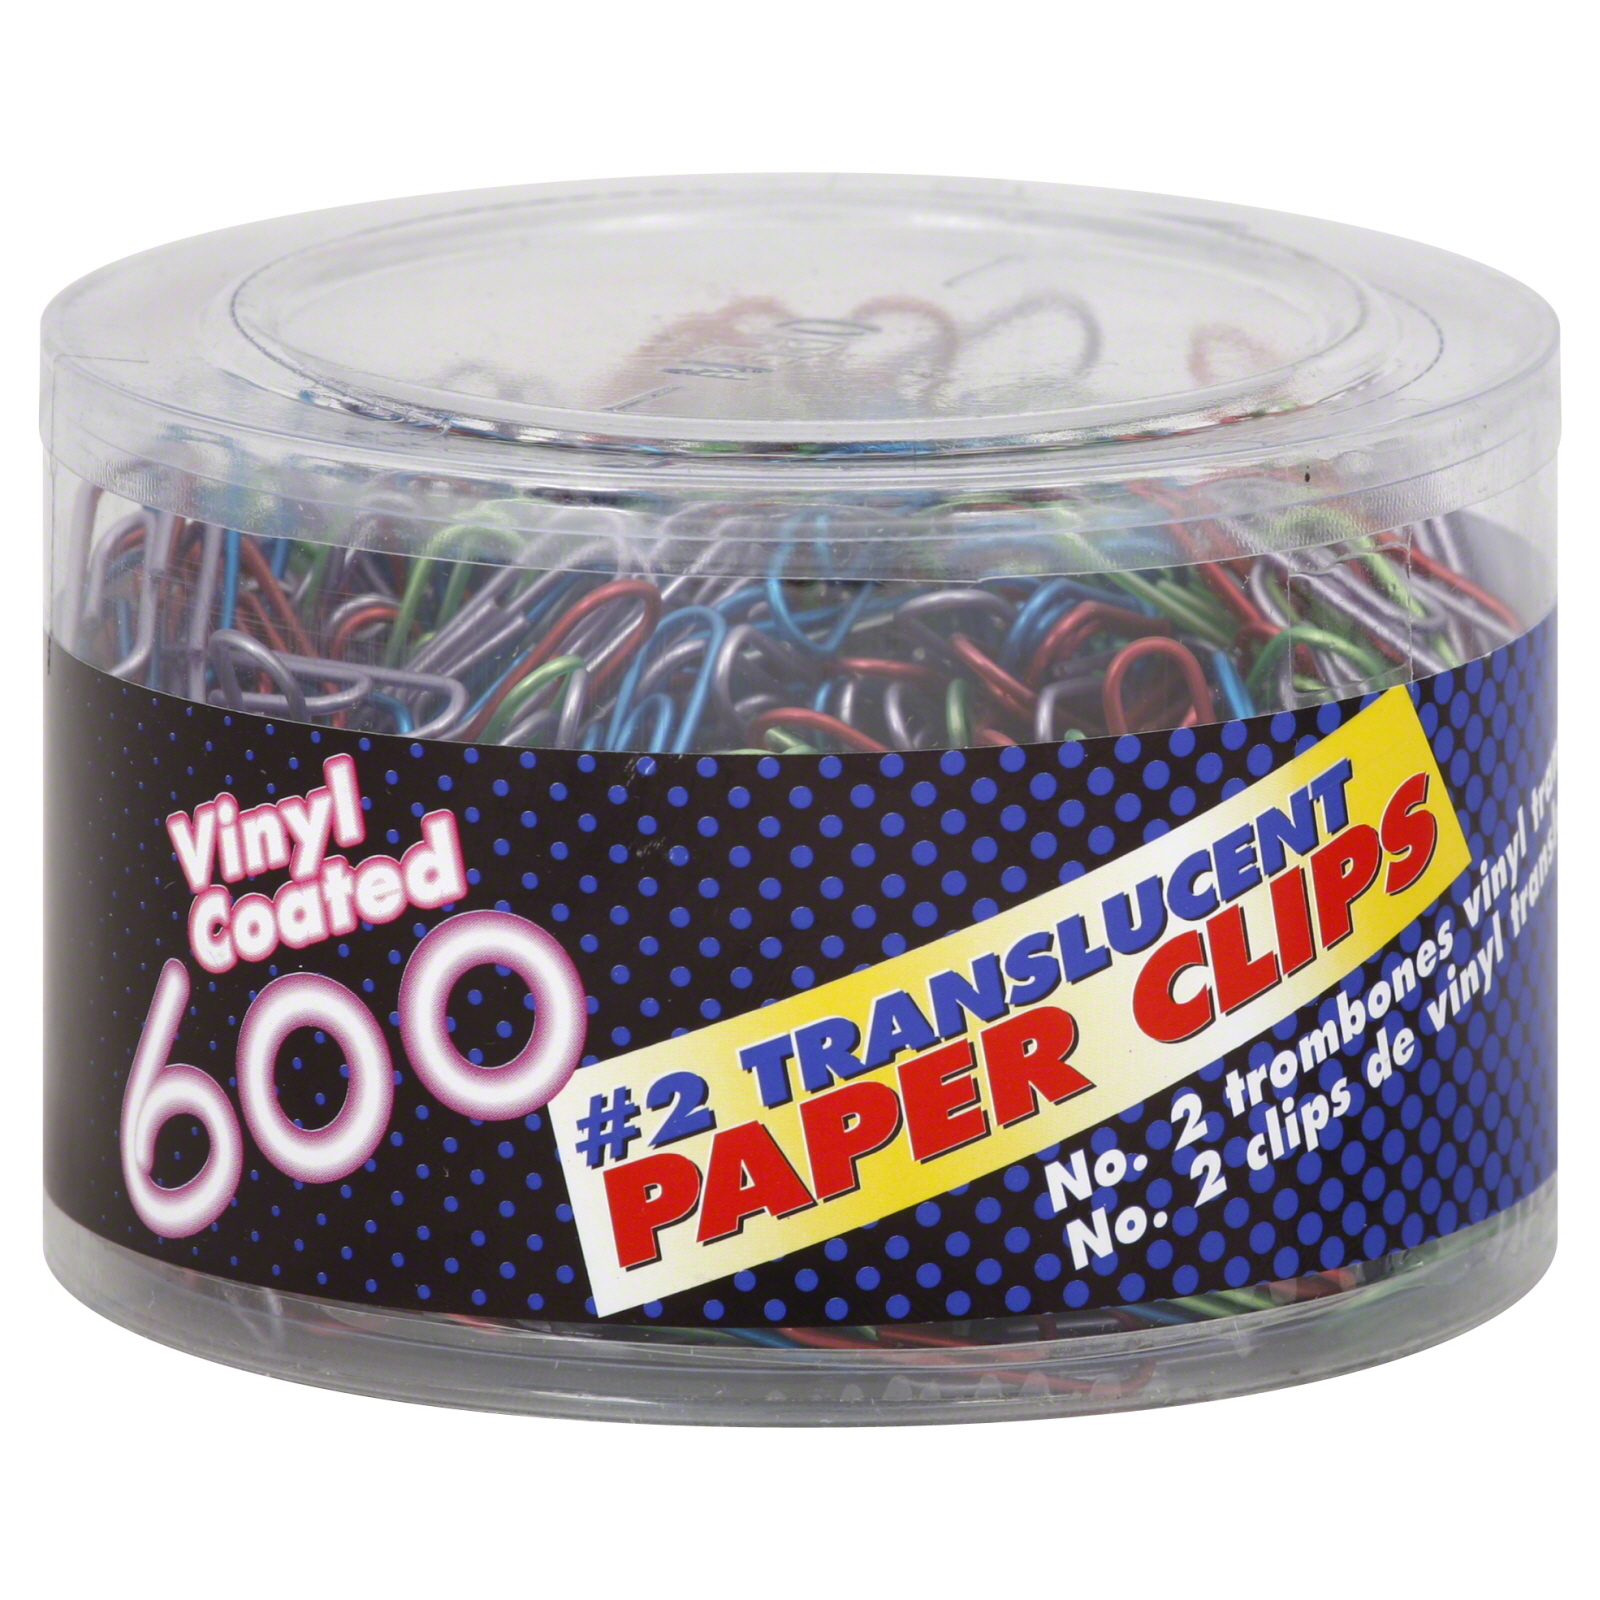 97211 OIC Paper Clips, Vinyl Coated, No. 2 Translucent, 600 paper clips